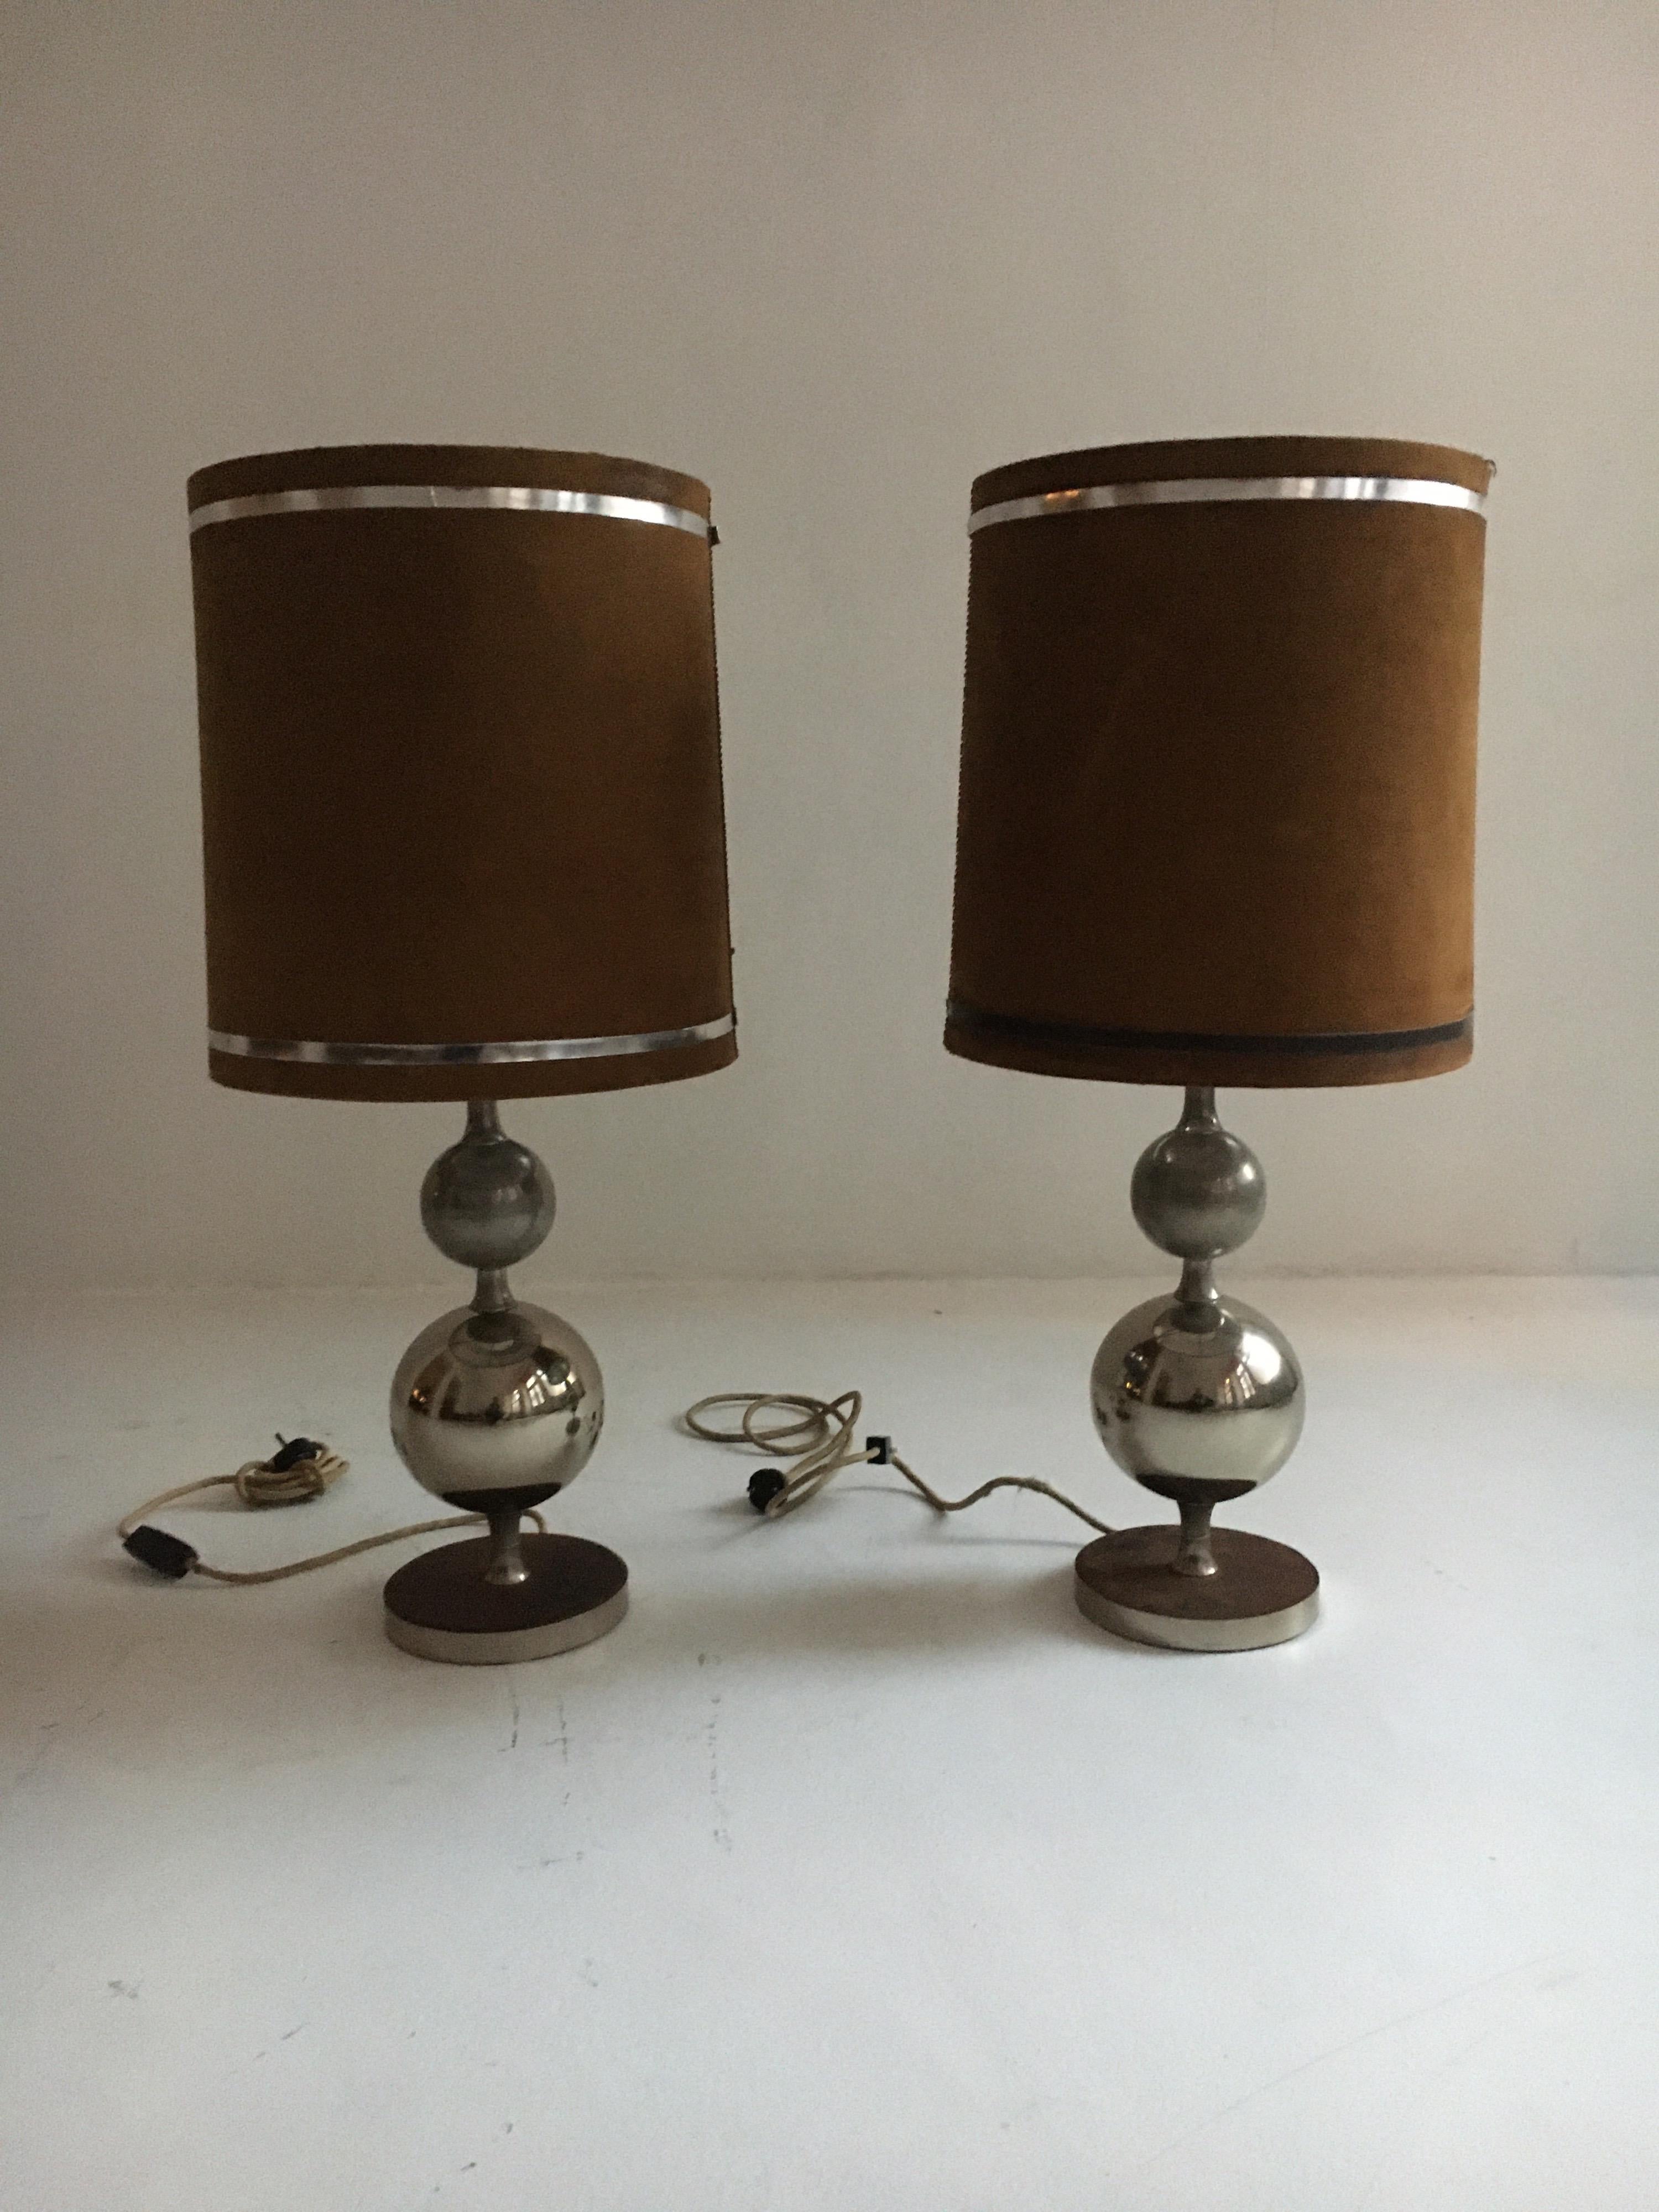 Pierre Cardin oversized chrome and suede table lamps, France, 1970s.